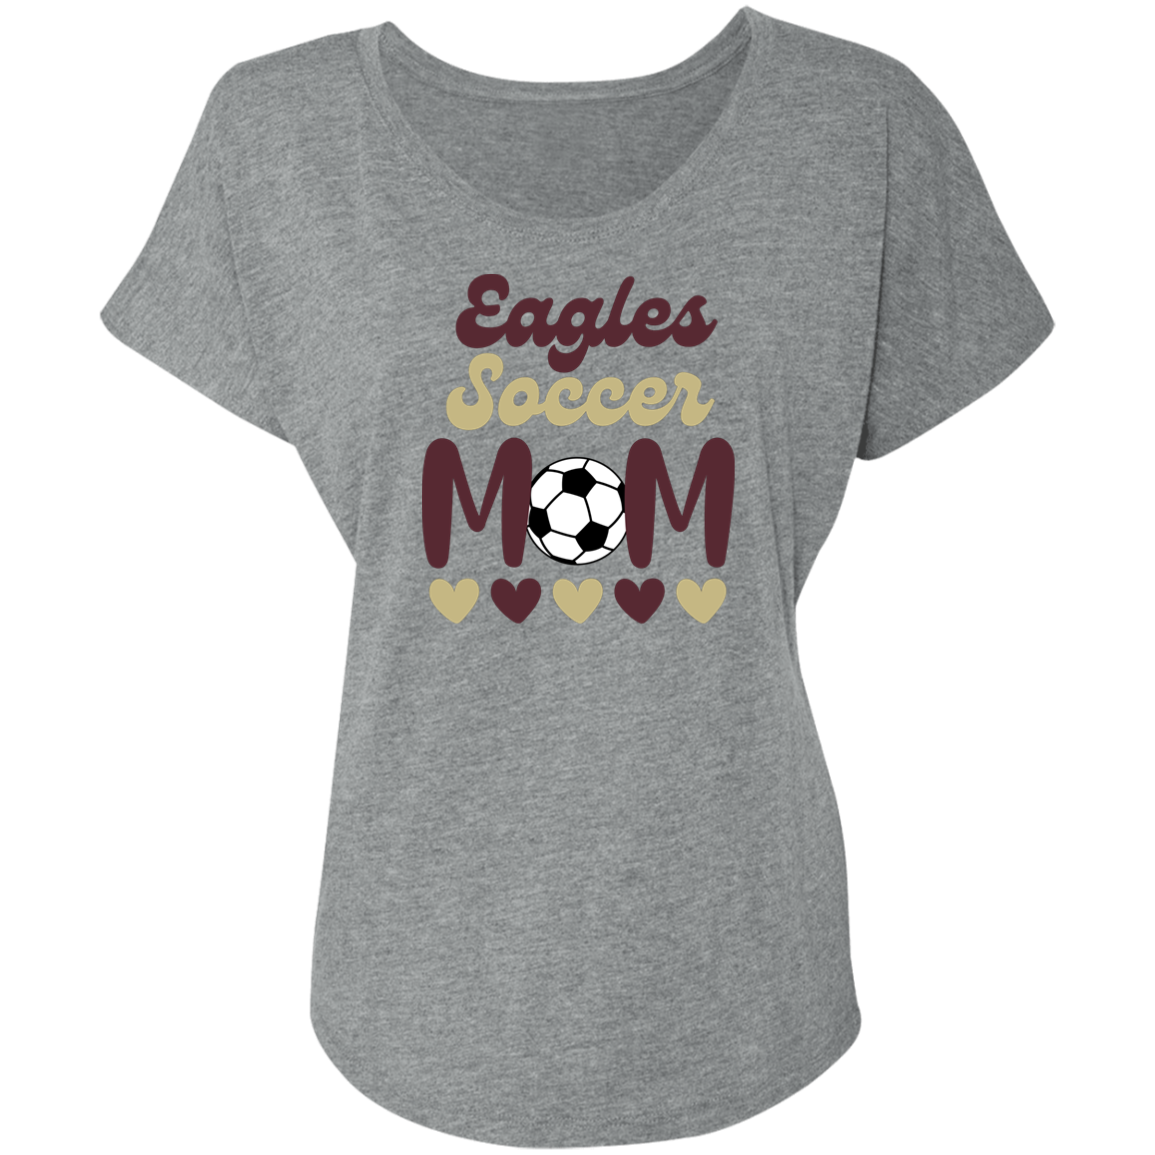 Women's Super Soft Soccer Mom Dolman Graphic Tee - New Albany Eagles